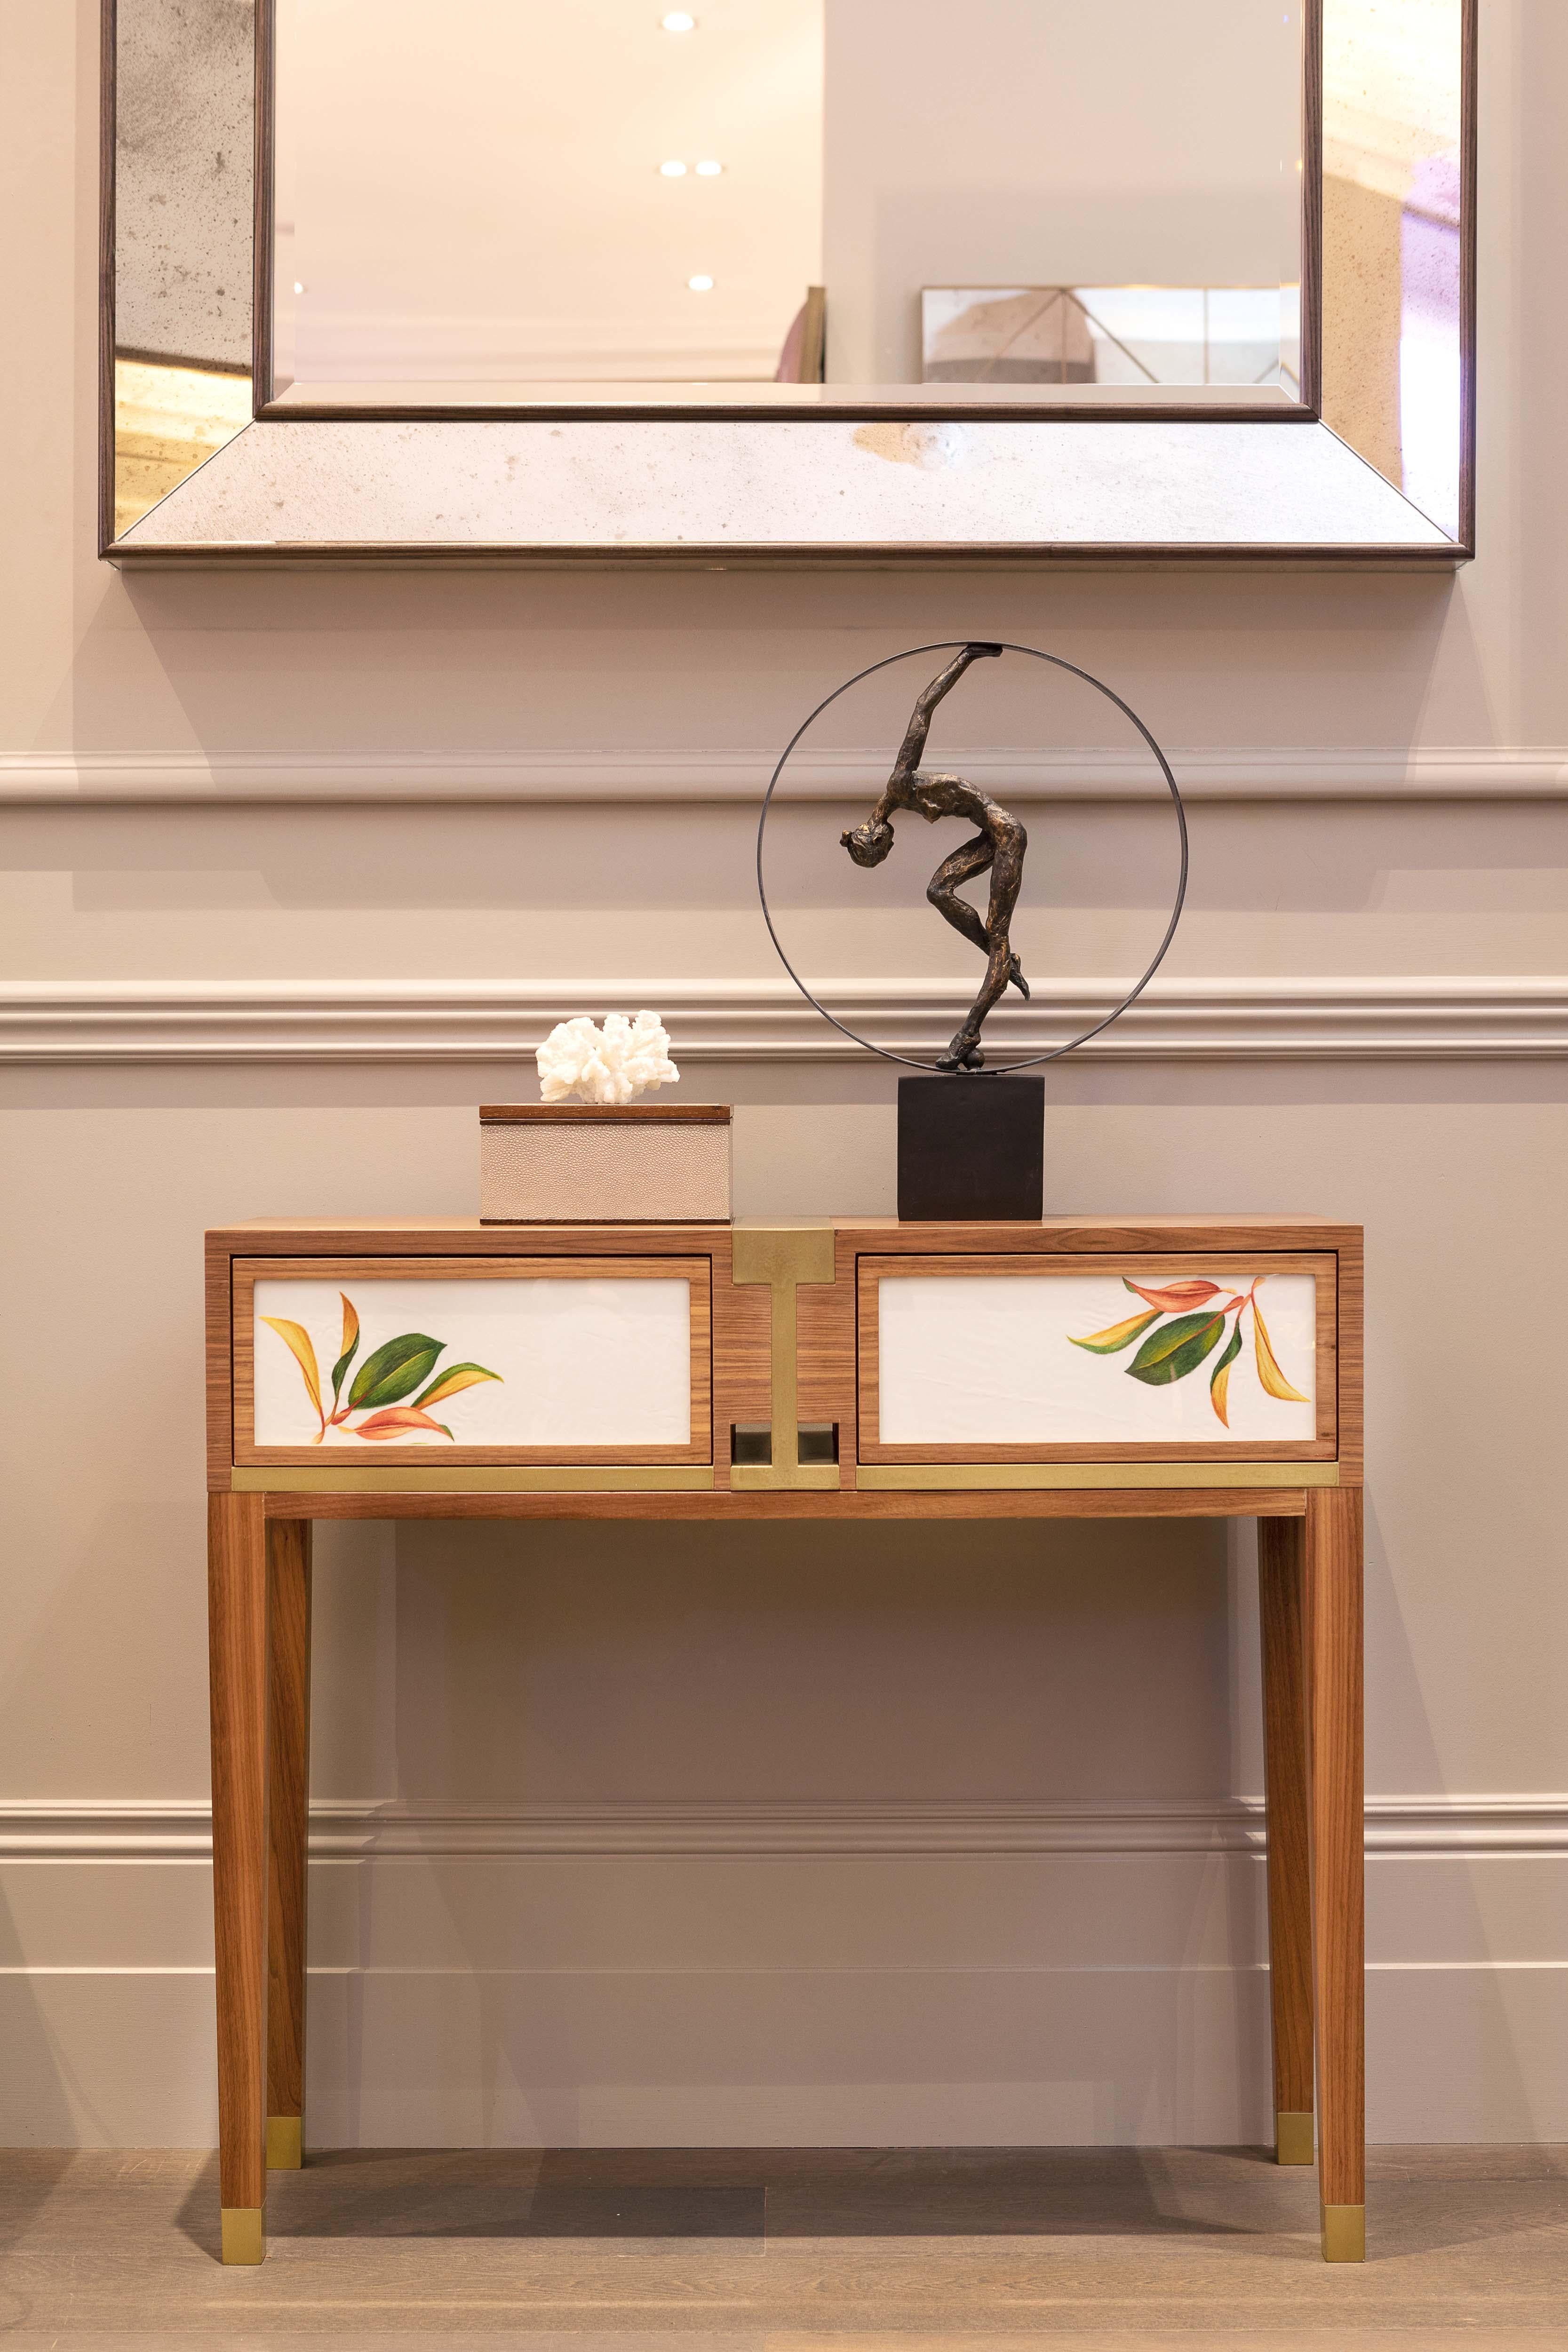 The interlocking design element is inspired by the ancient double luck character in Chinese calligraphy. The brass and veneered walnut give a prominent contrast to emphasise on the push-open panelled drawer, decorated with hand-made silk